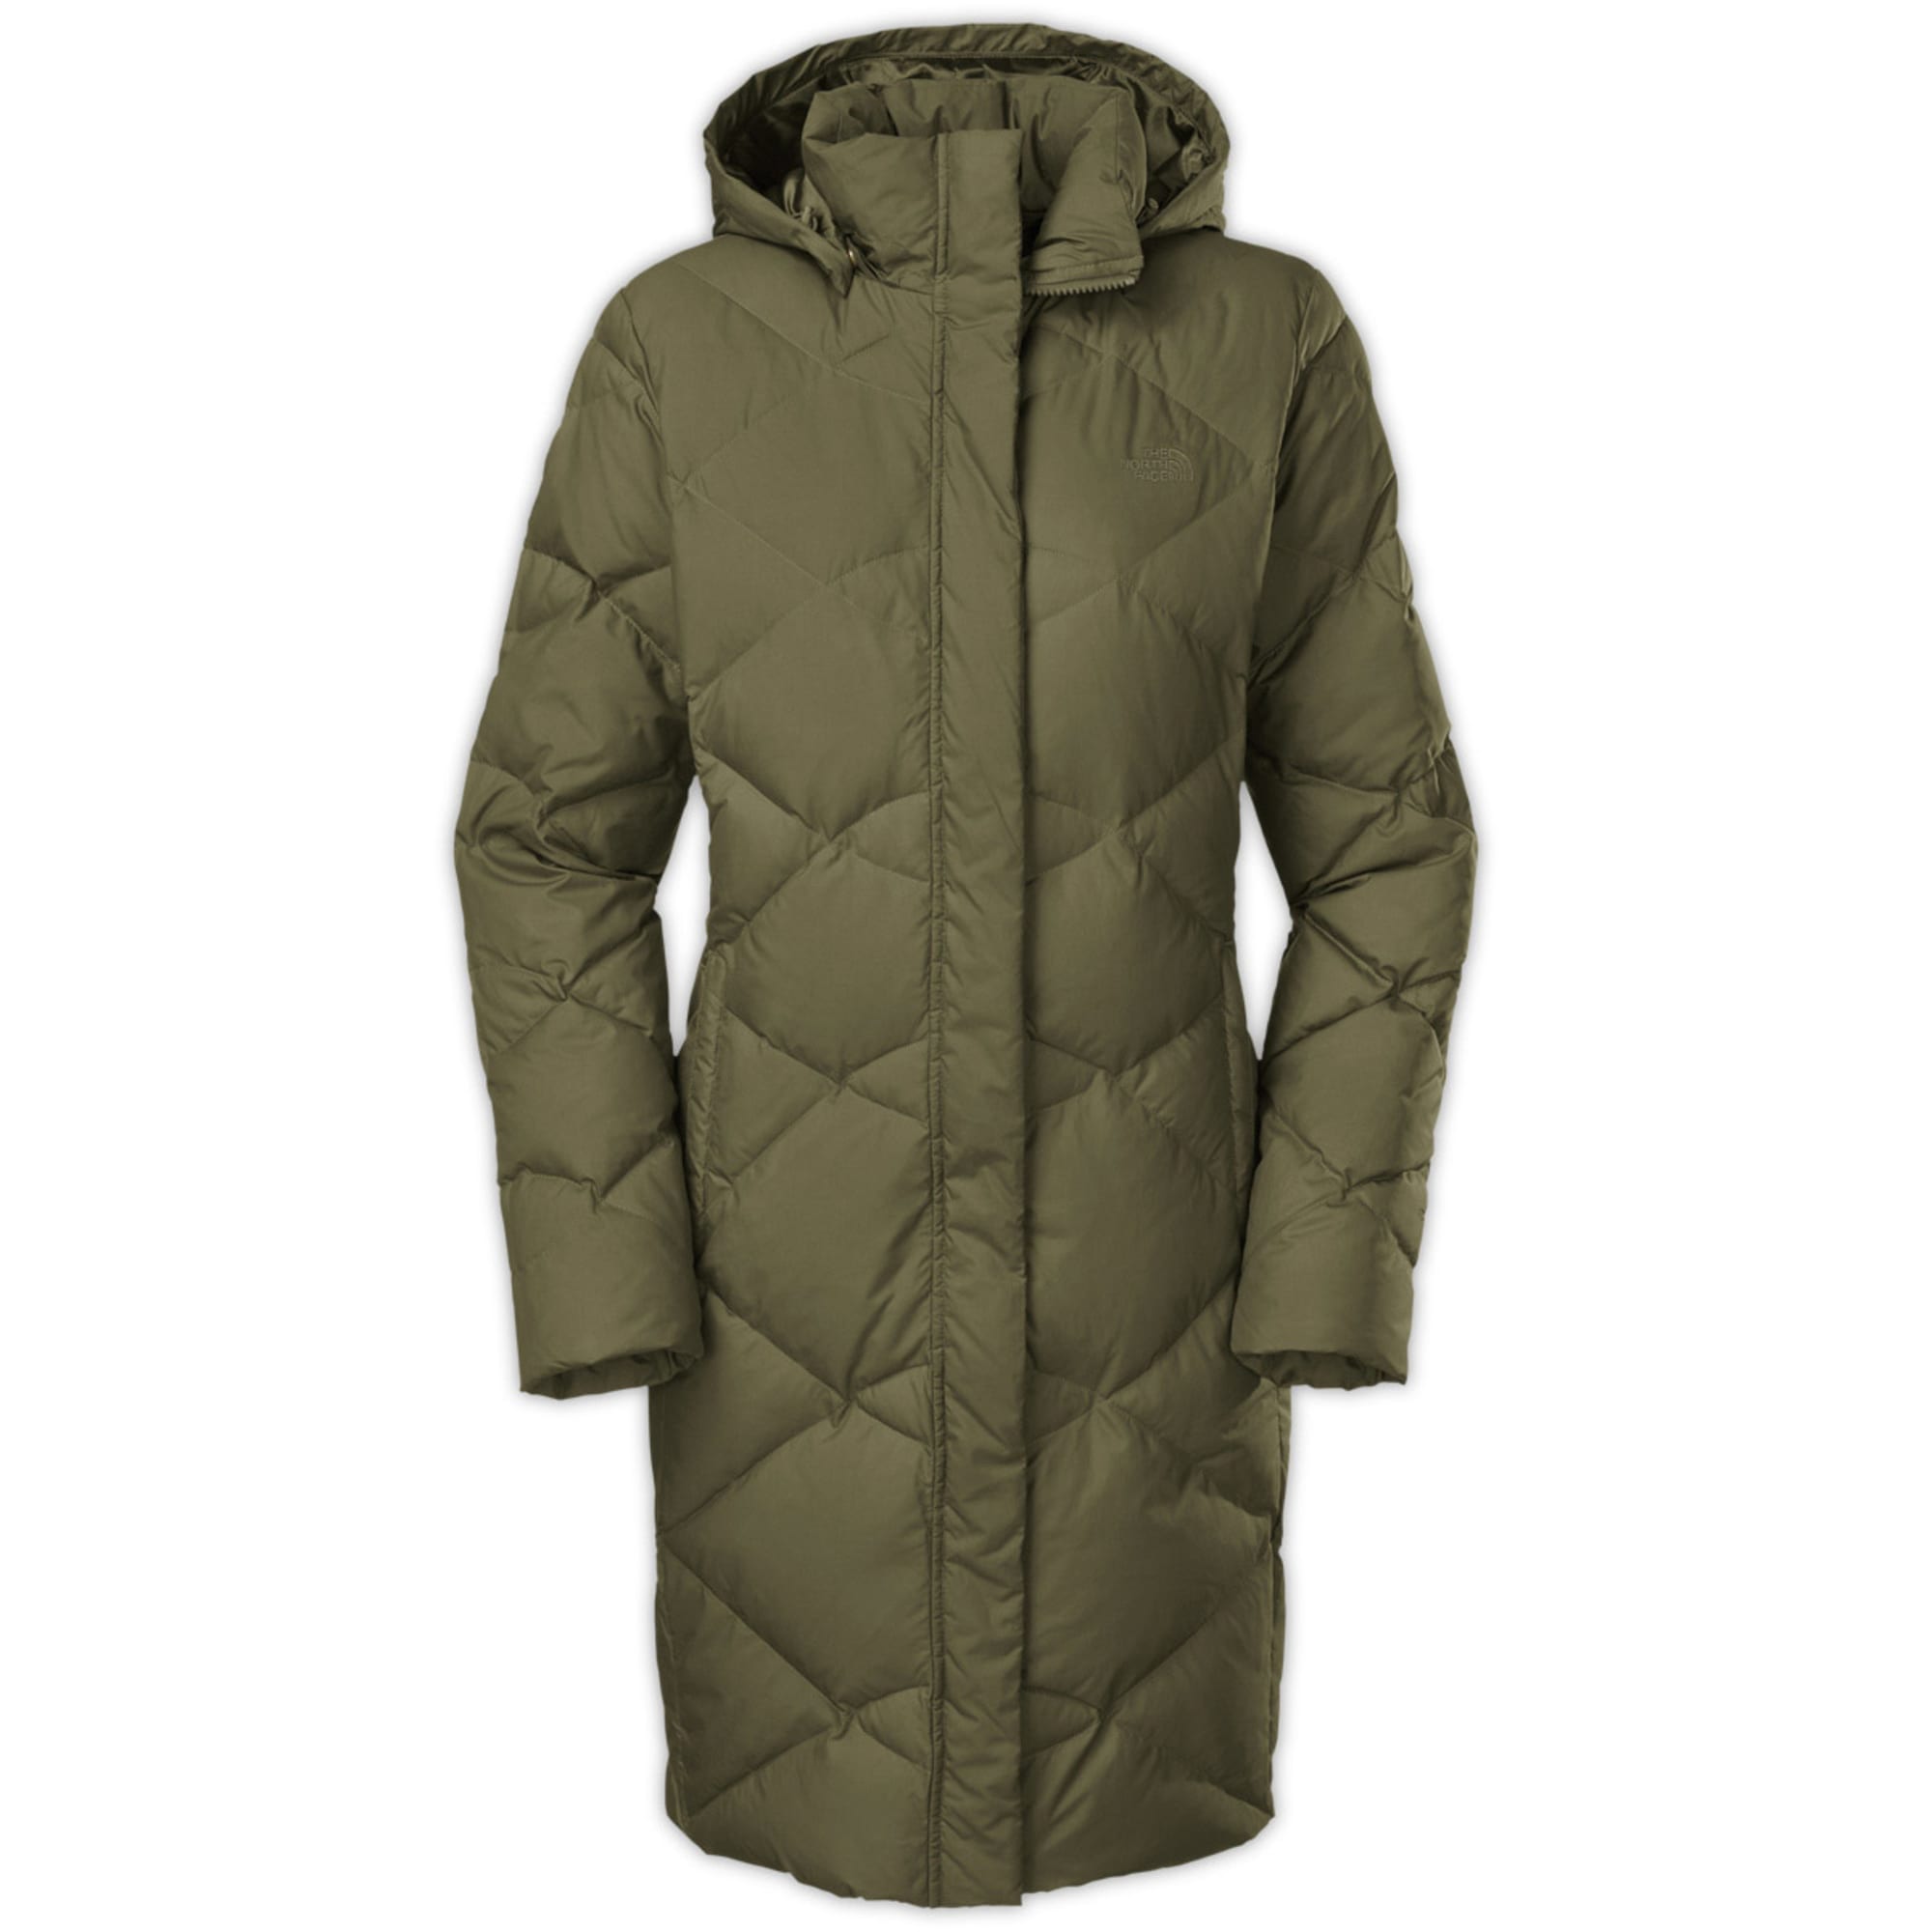 THE NORTH FACE Women's Miss Metro Parka - Eastern Mountain Sports